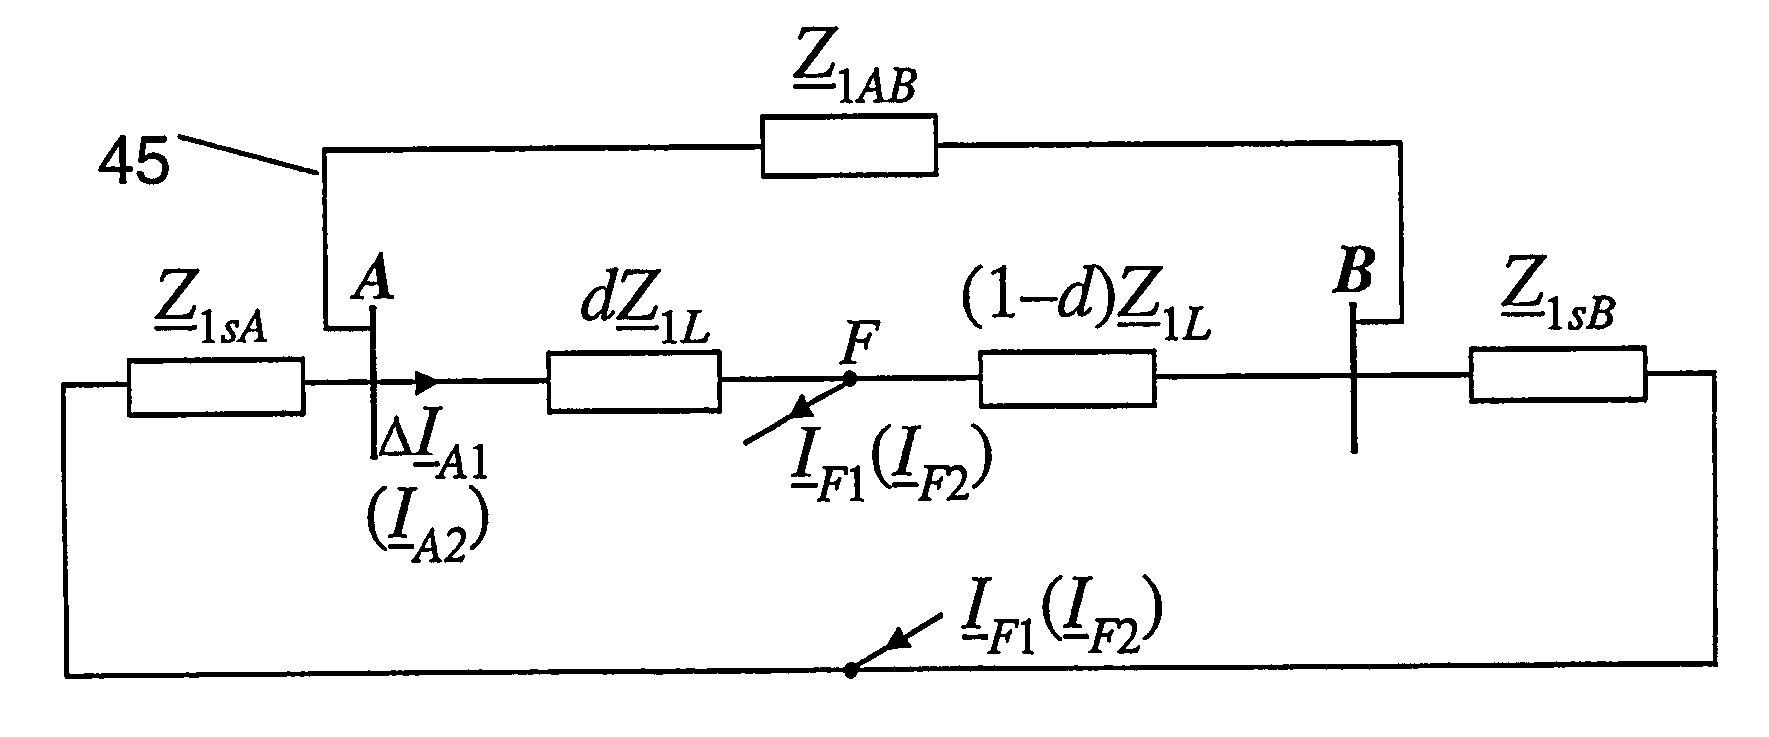 Fault location using measurements of current and voltage from one end of a line